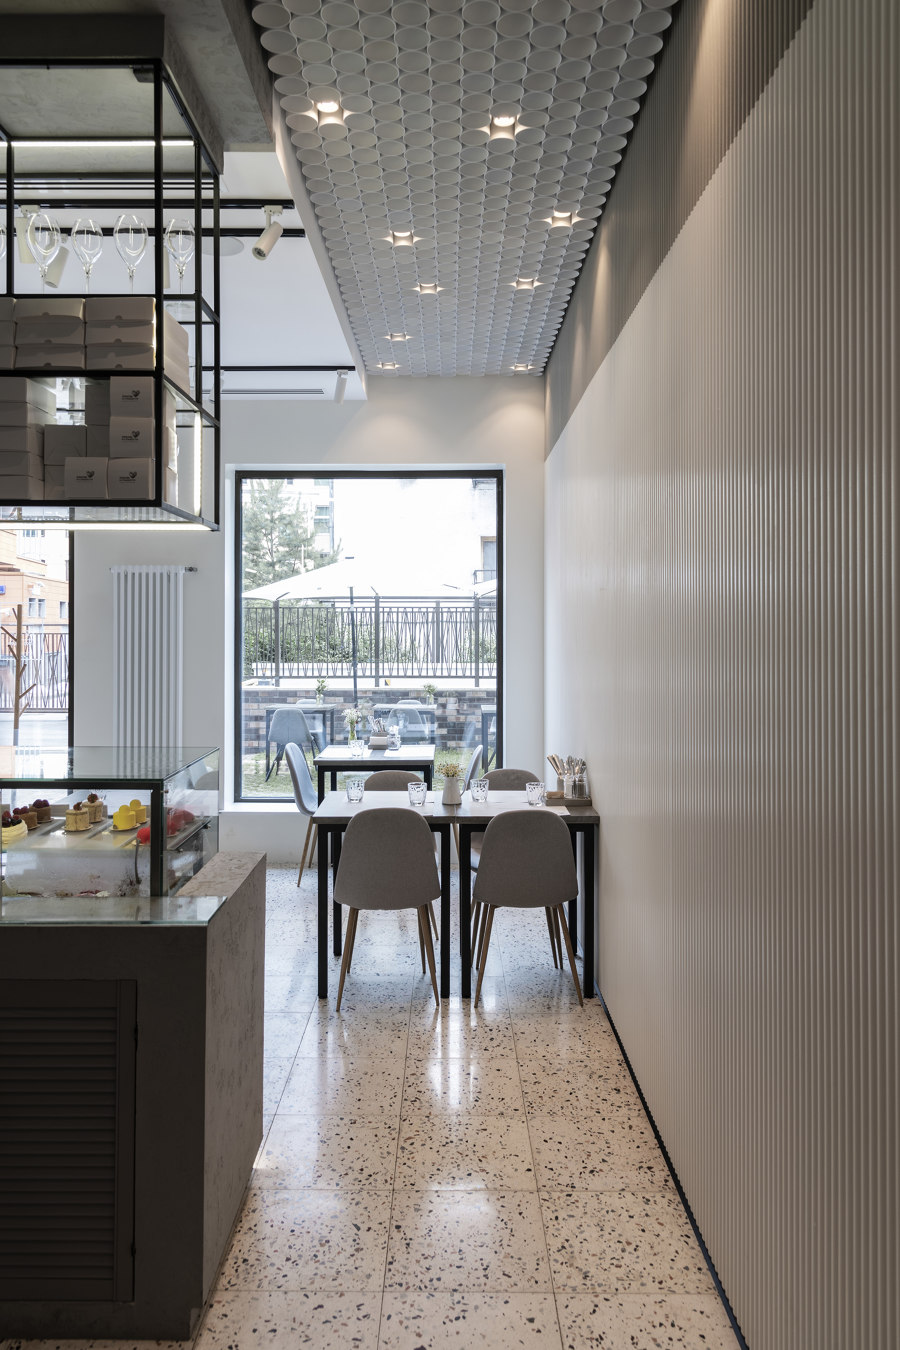 Cafe-confectionery Love and Sweets by QPRO | Café interiors